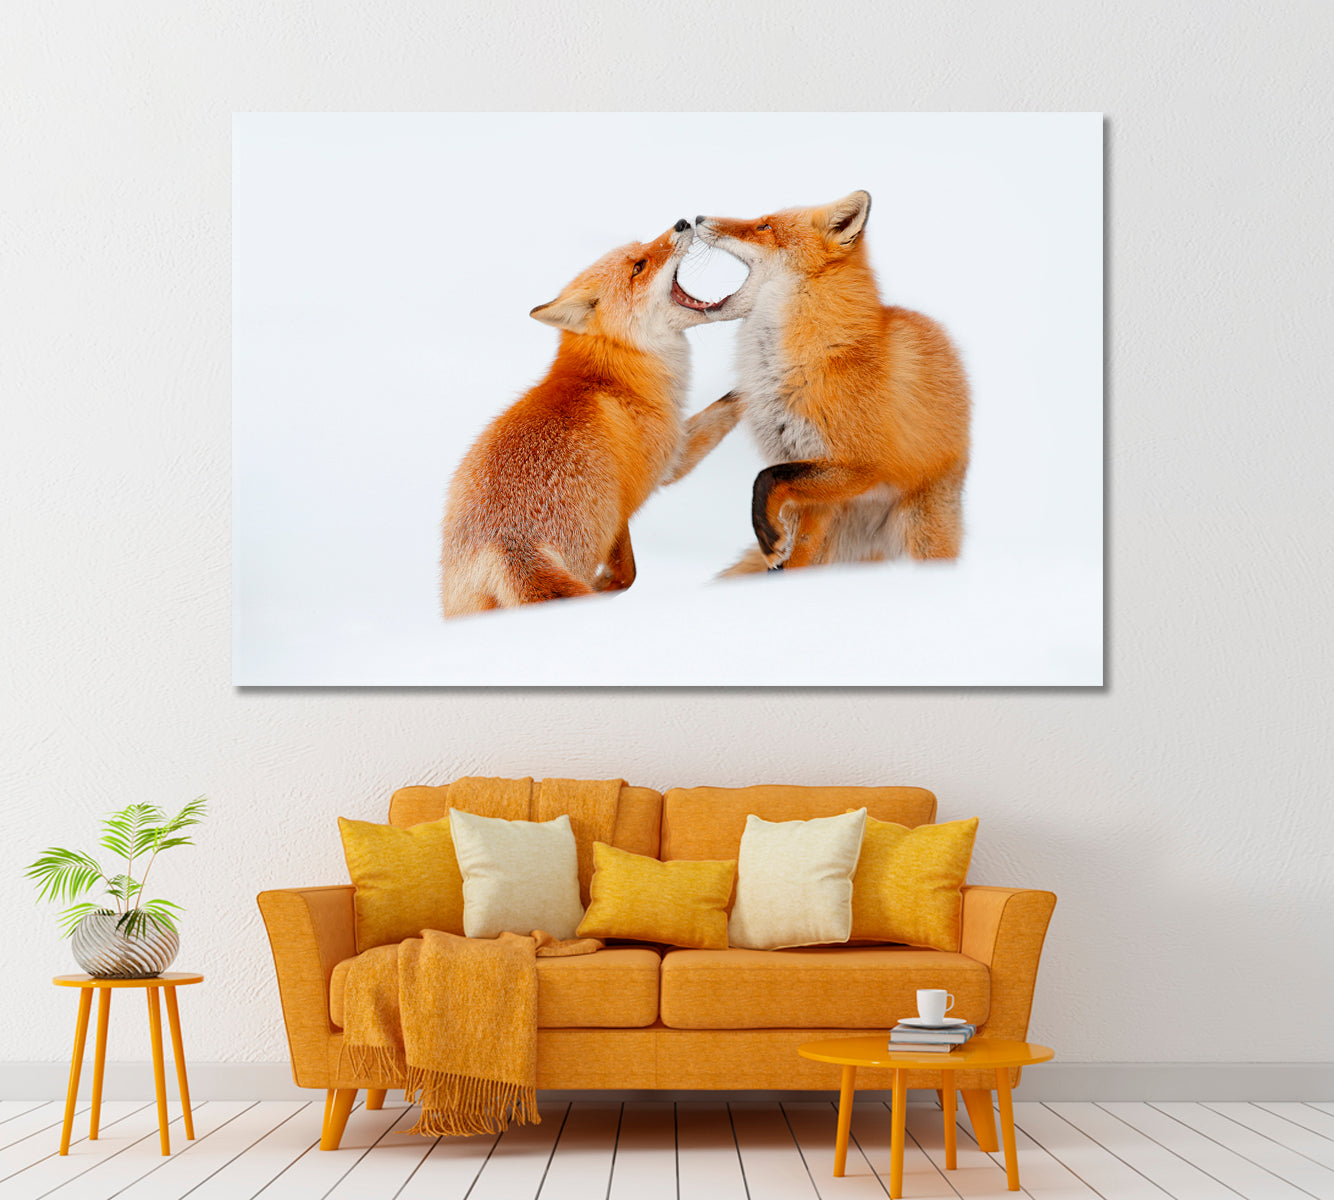 Red Foxes Playing in Snow Hokkaido Japan Canvas Print ArtLexy 1 Panel 24"x16" inches 